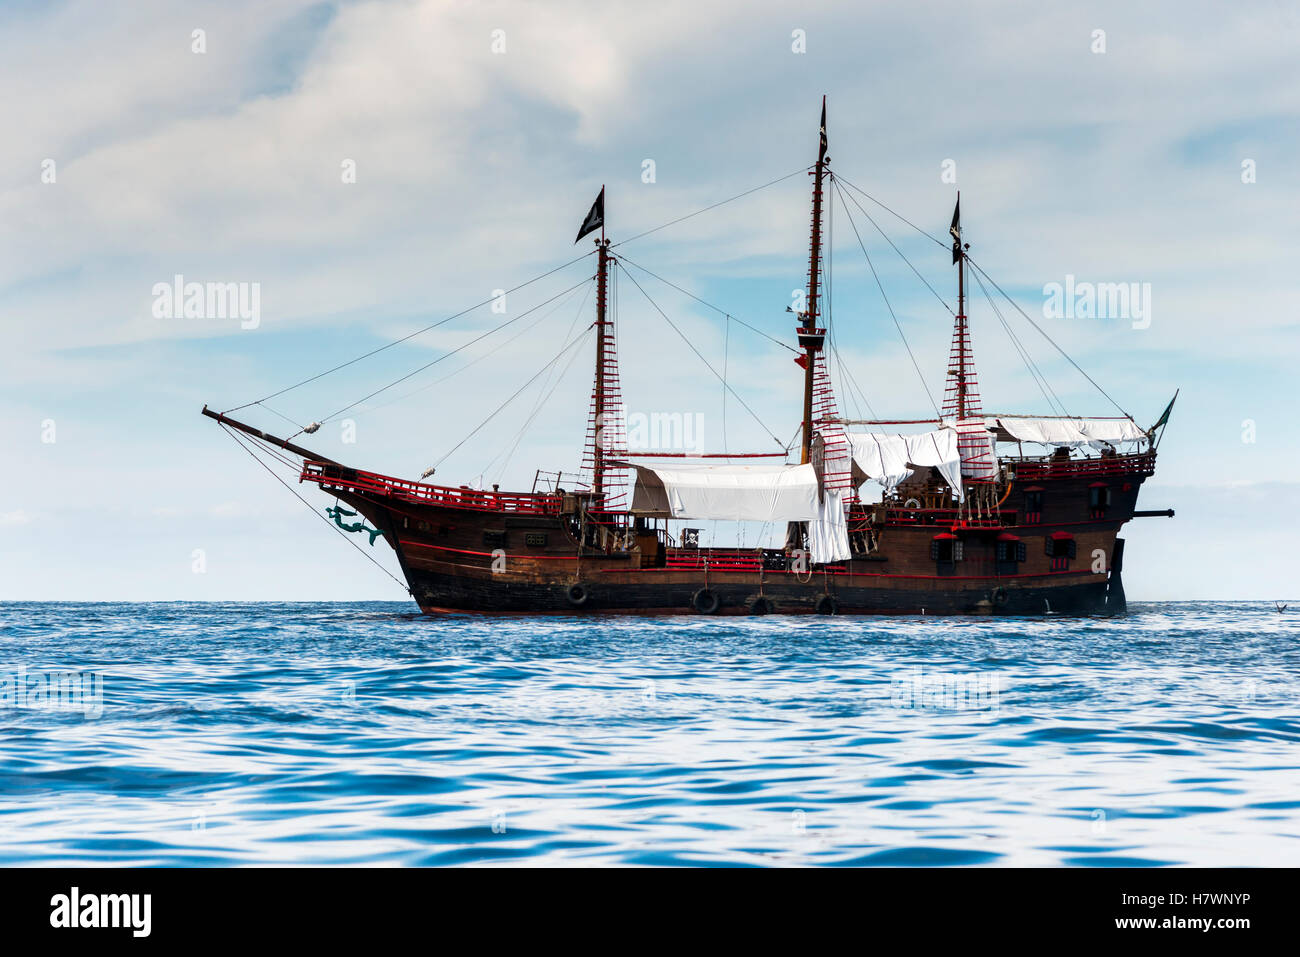 Ship out in the pacific ocean; Yalepa, Jalisco, Mexico Stock Photo